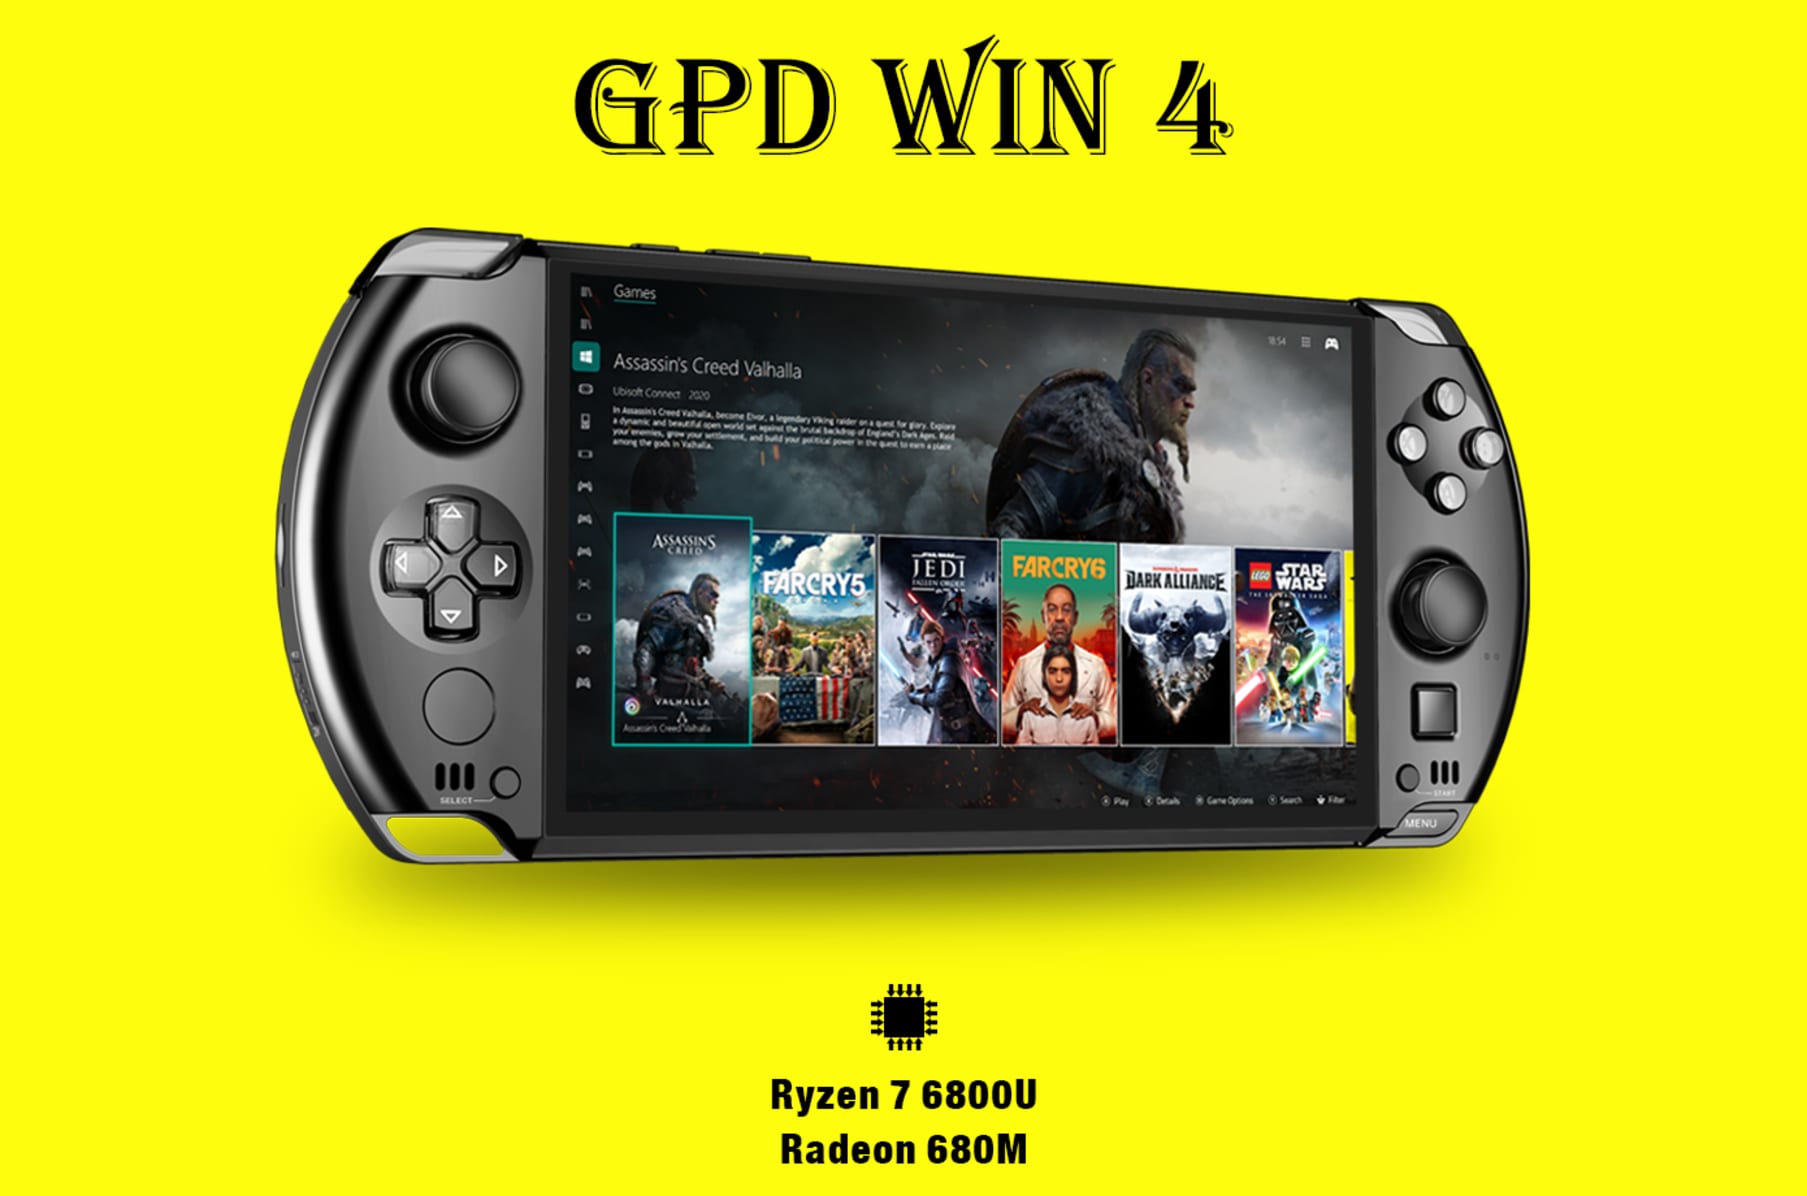 GPD WIN Game Pad Handheld System 64 GB Color Black Used